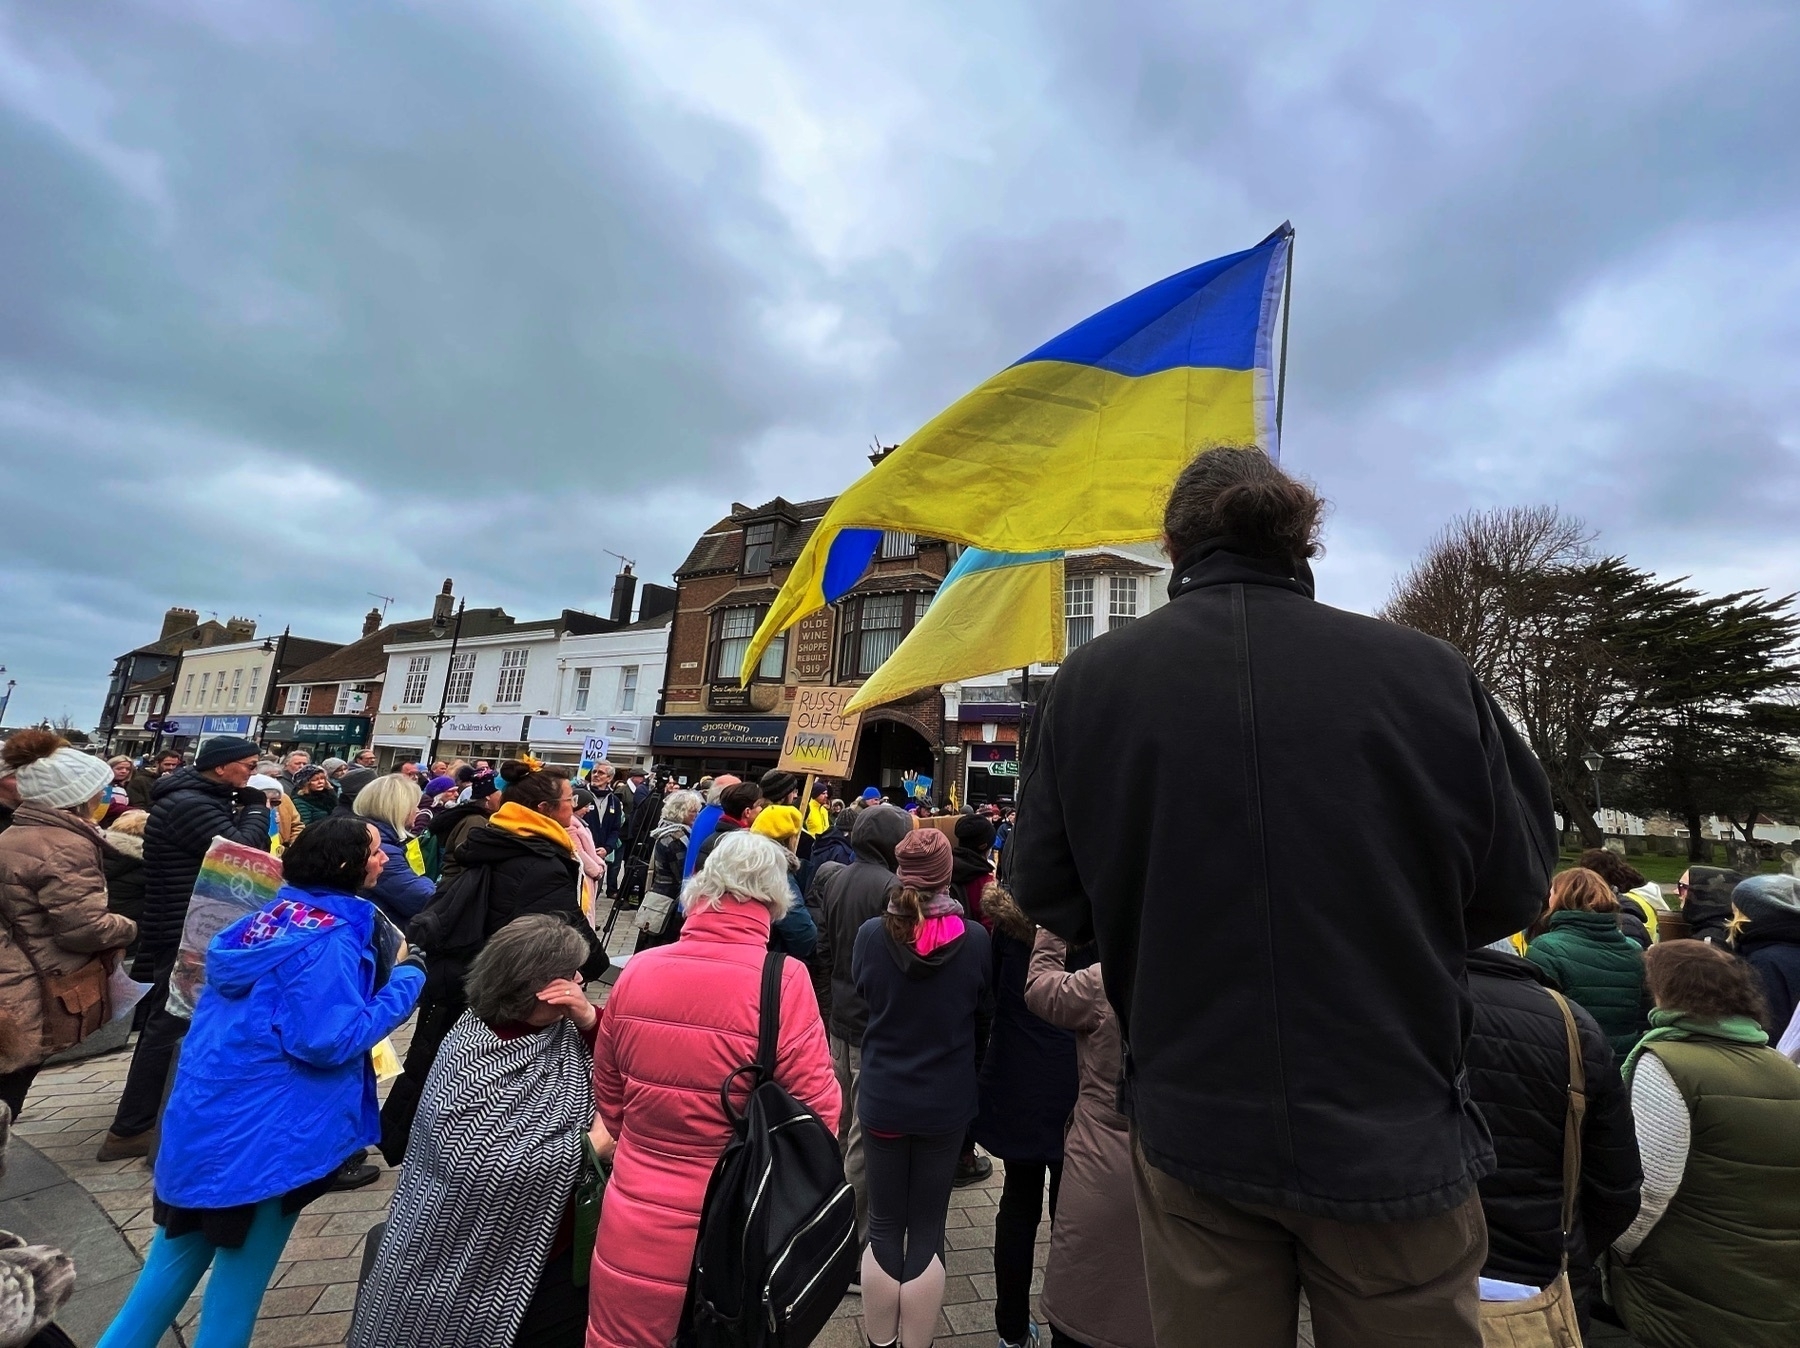 A Ukraine flag flying above a protest in Shoreham-by-Sea.